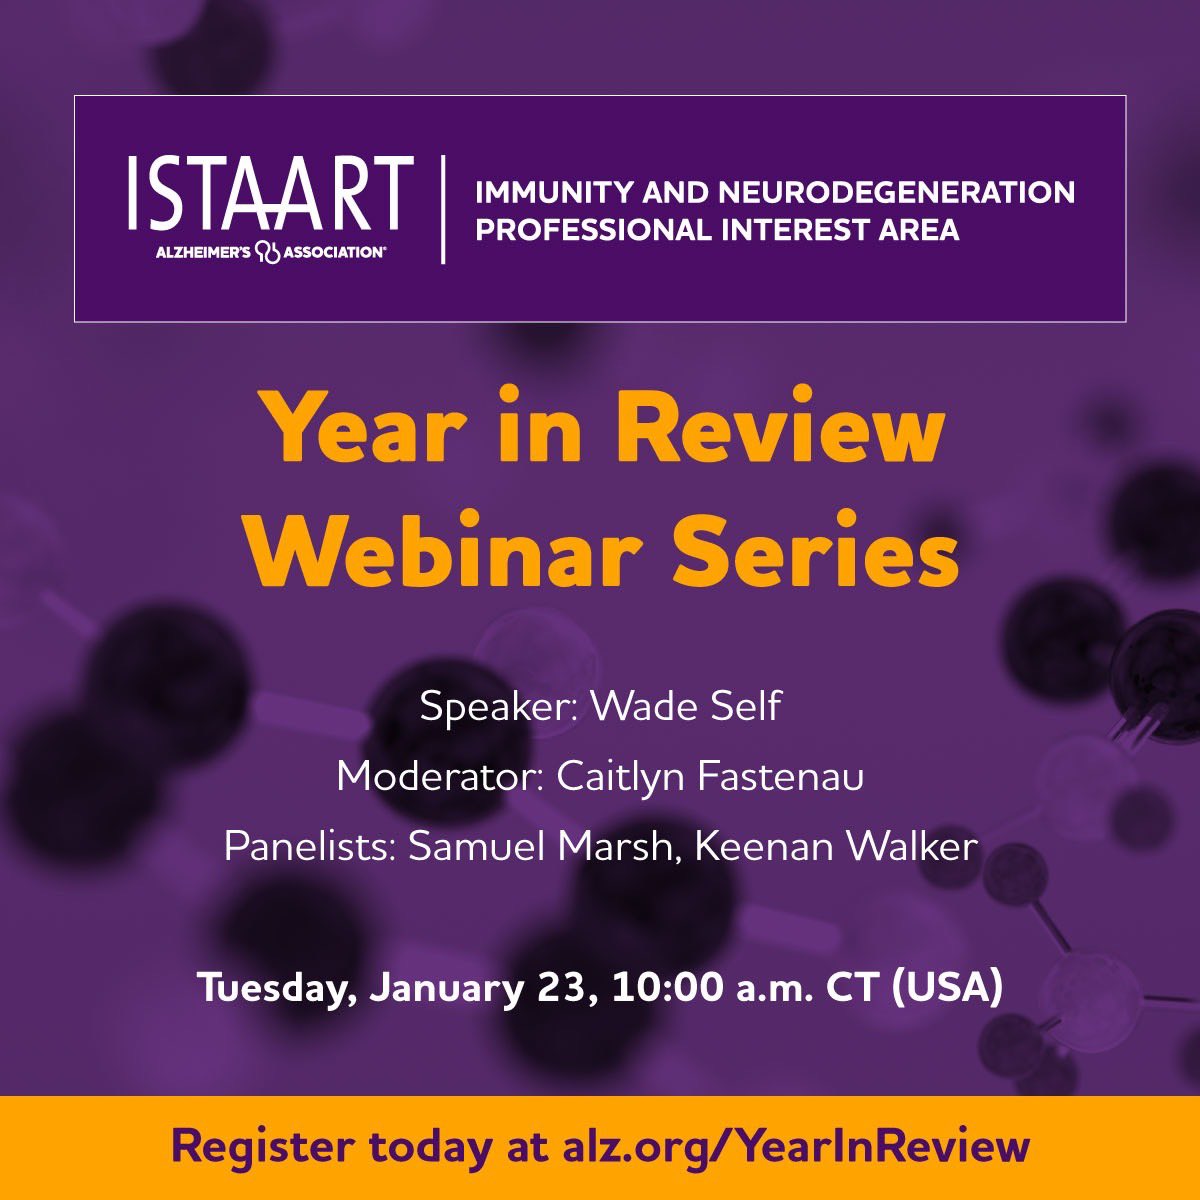 Tune in for our @ISTAART Immunity and Neurodegeneration Year in Review Webinar!! @ImmunityPIA